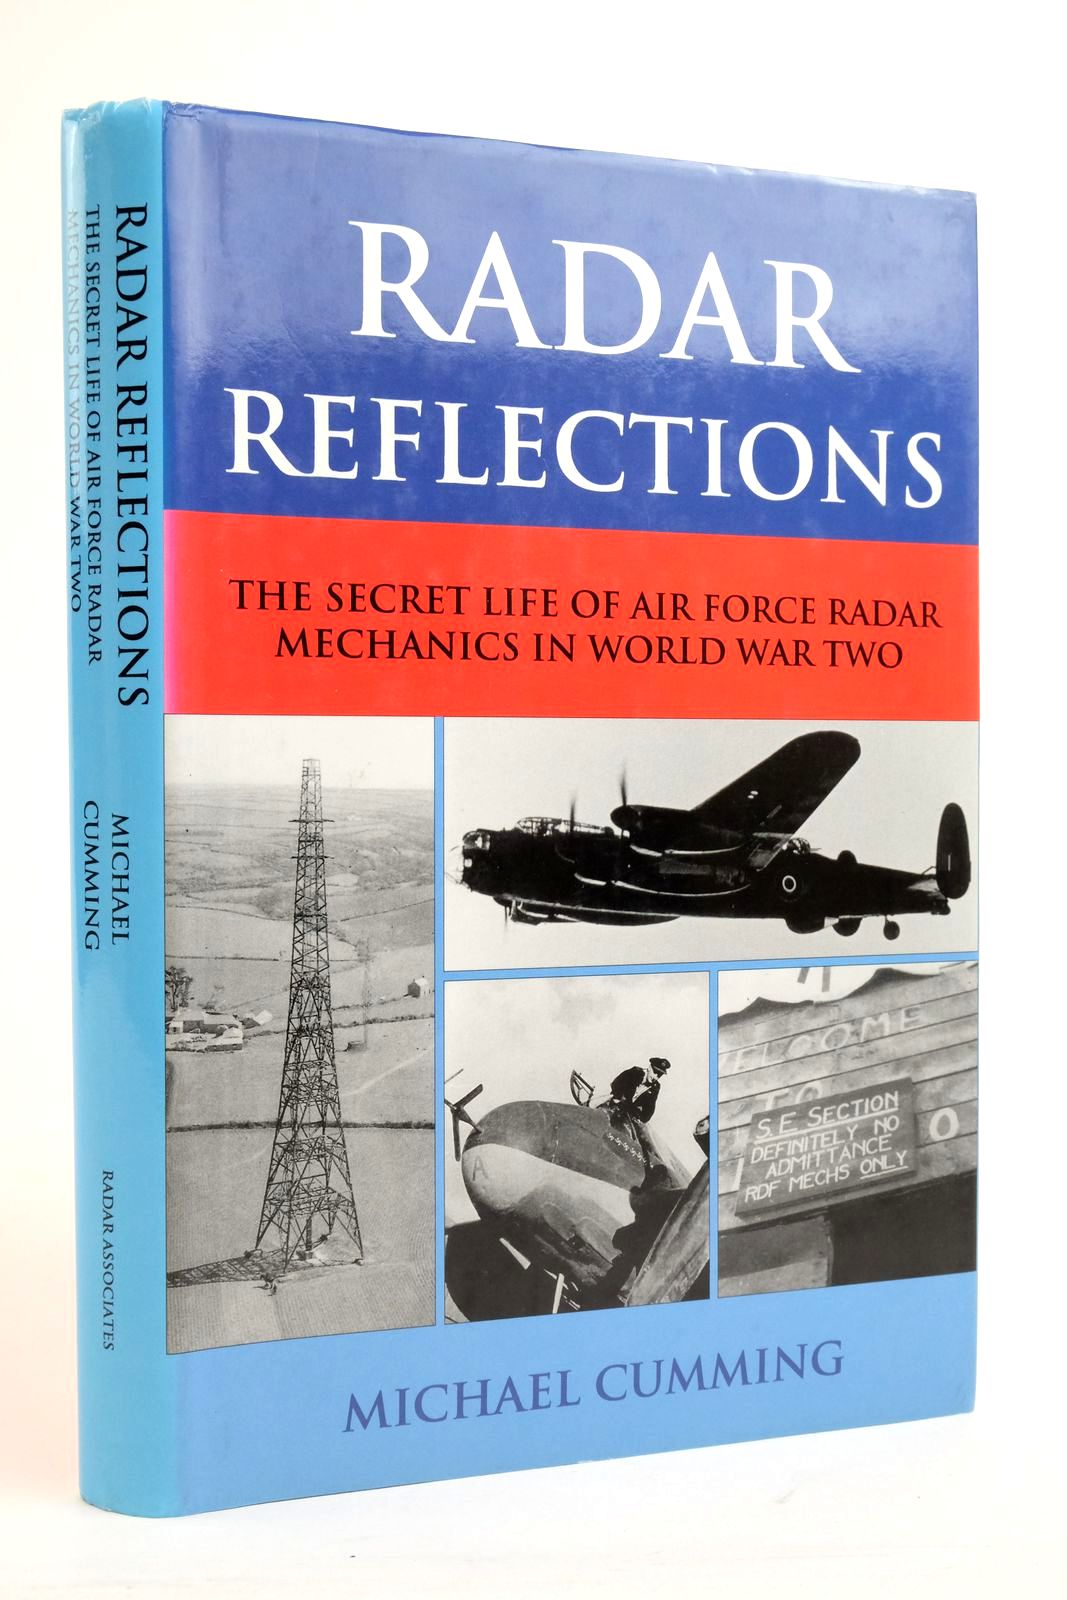 Photo of RADAR REFLECTIONS: THE SECRET LIFE OF AIR FORCE RADAR MECHANICS IN WORLD WAR TWO written by Cumming, Michael published by Radar Associates (STOCK CODE: 2136237)  for sale by Stella & Rose's Books